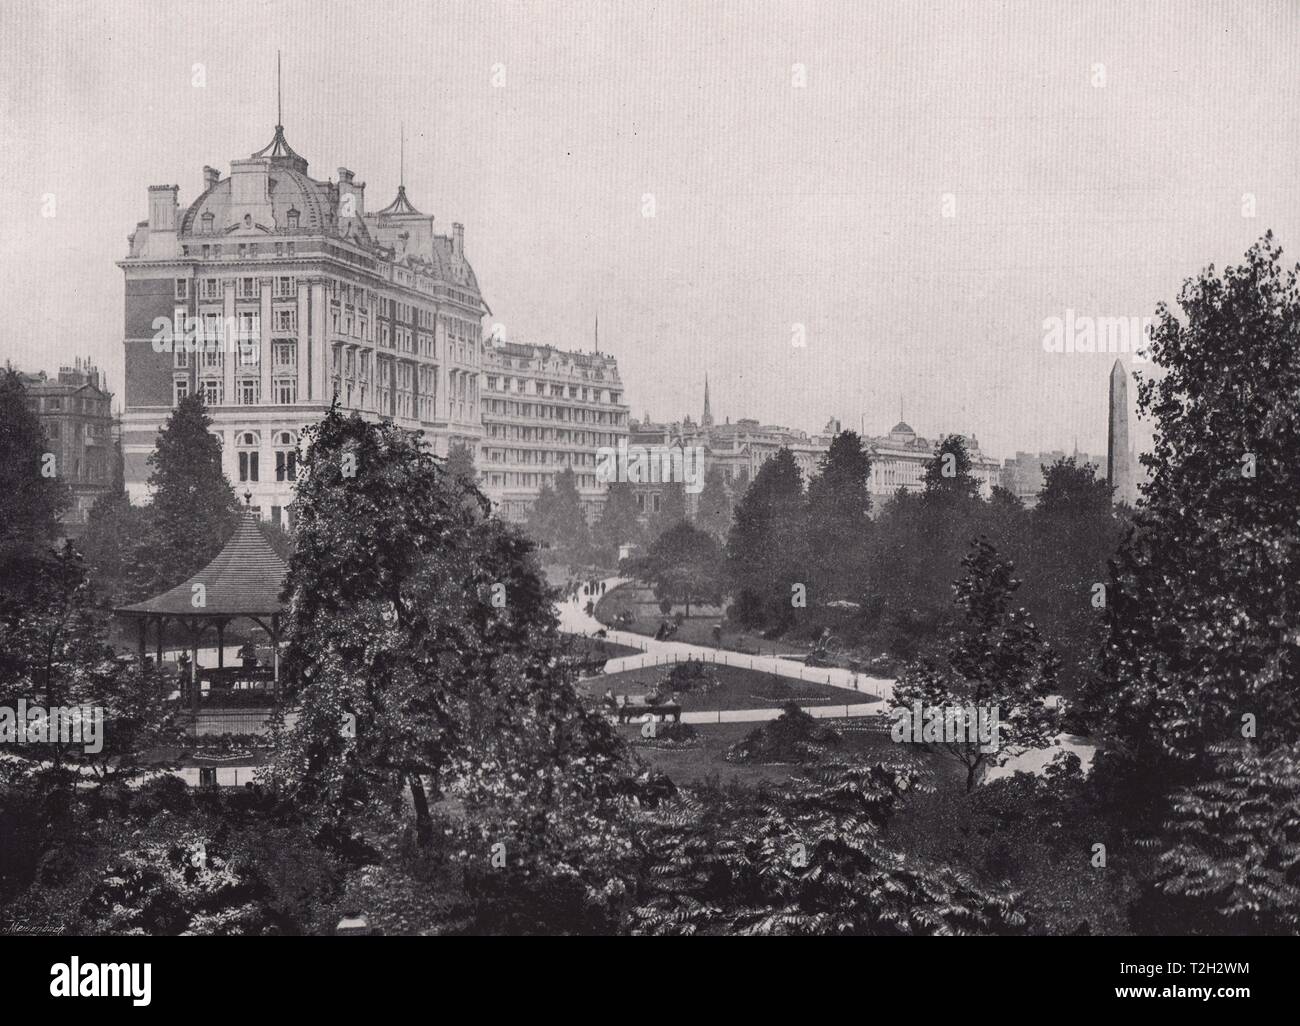 Embankment Gardens - With the Great Hotels, Somerset house, and Cleopatra's Needle Stock Photo